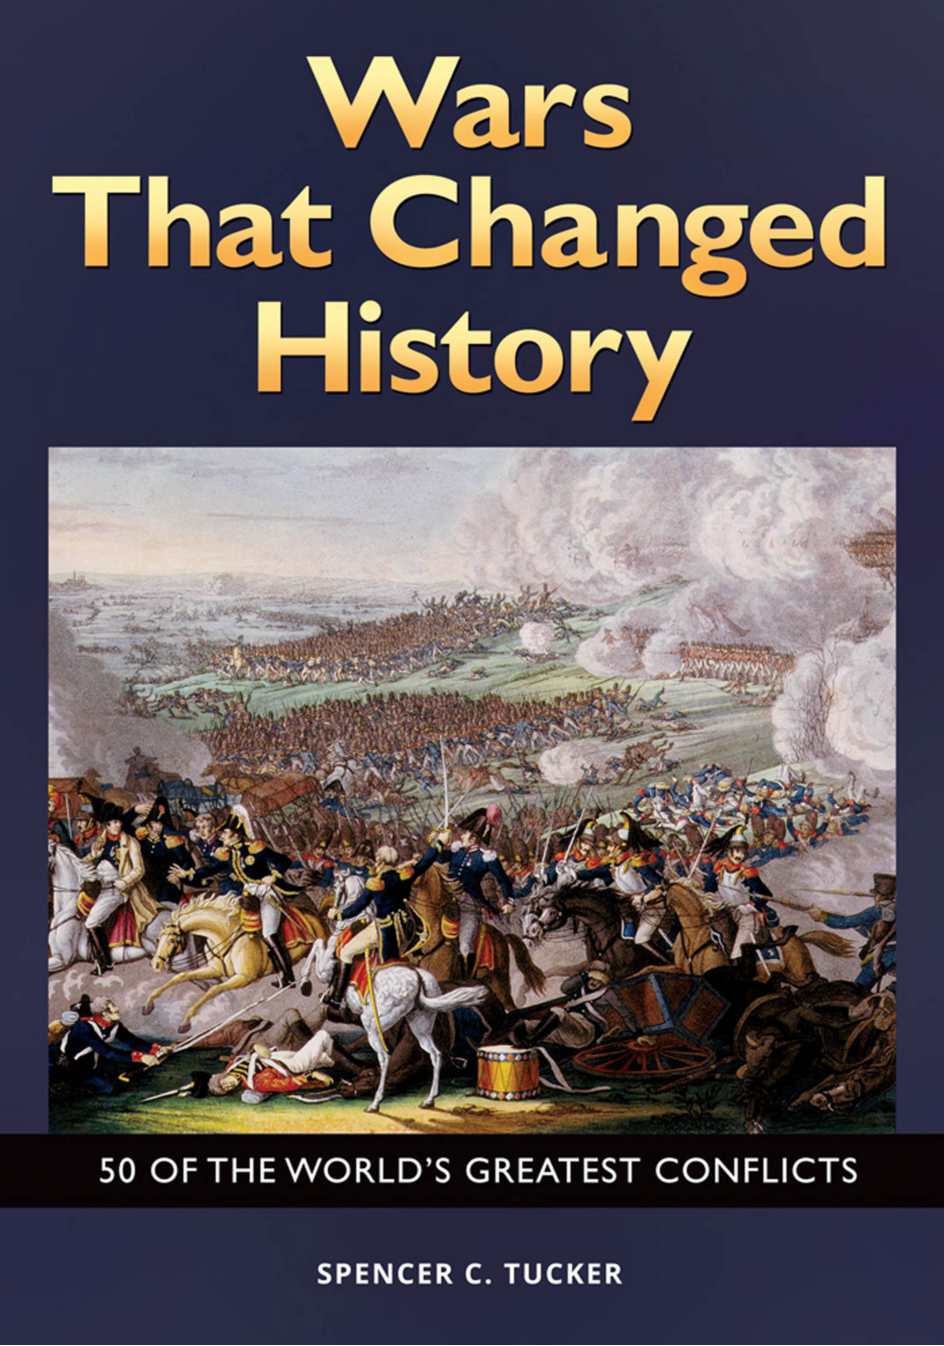 Wars That Changed History: 50 of the World's Greatest Conflicts page Cover1